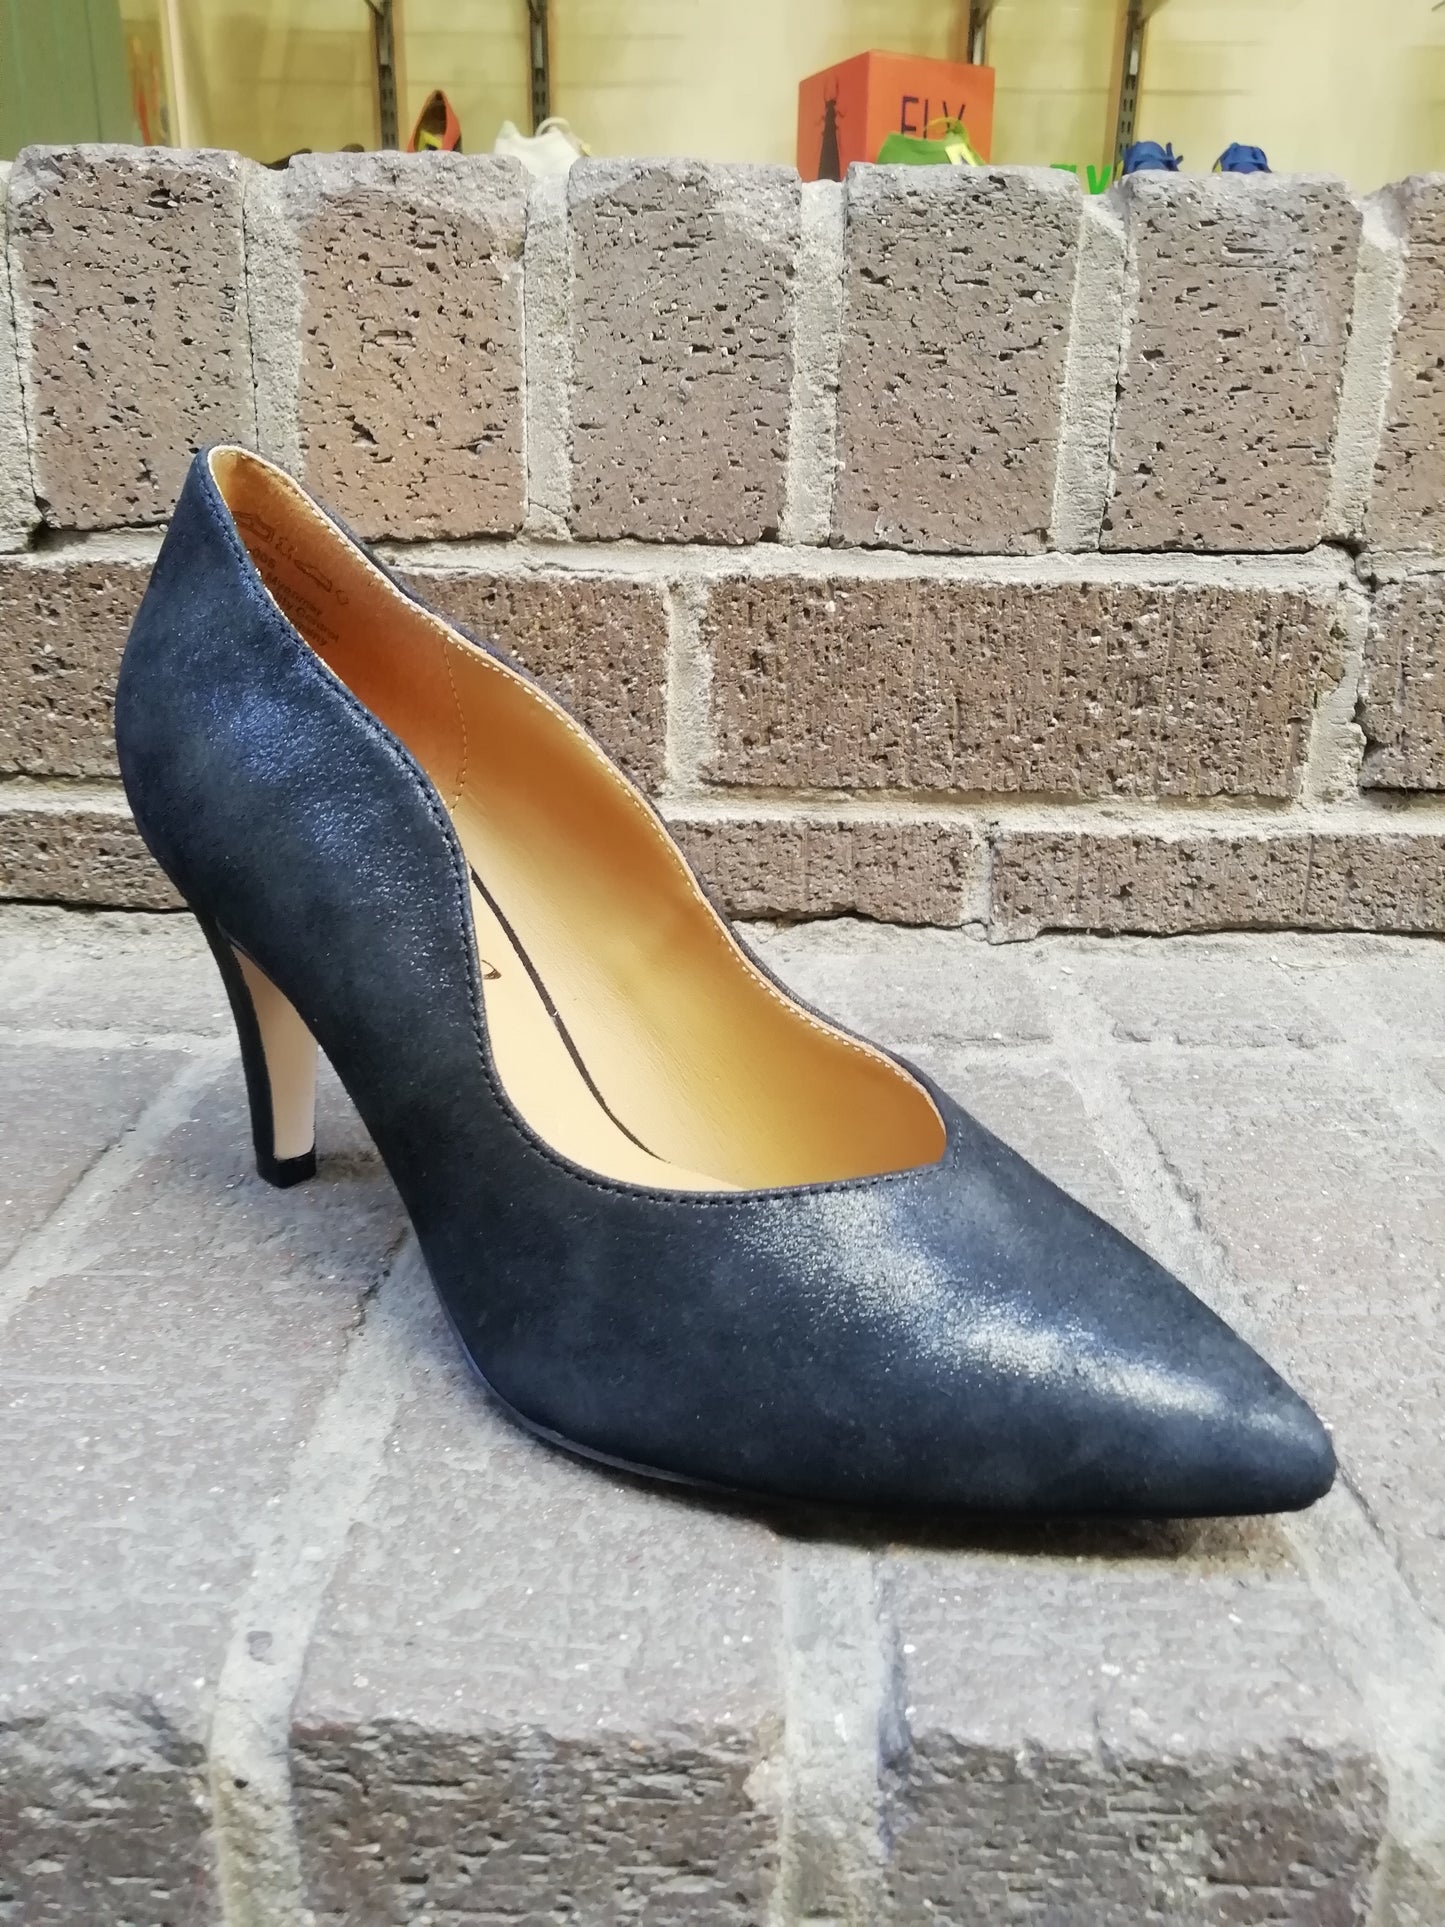 Caprice Black Pearl Leather Heeled Court Shoe.